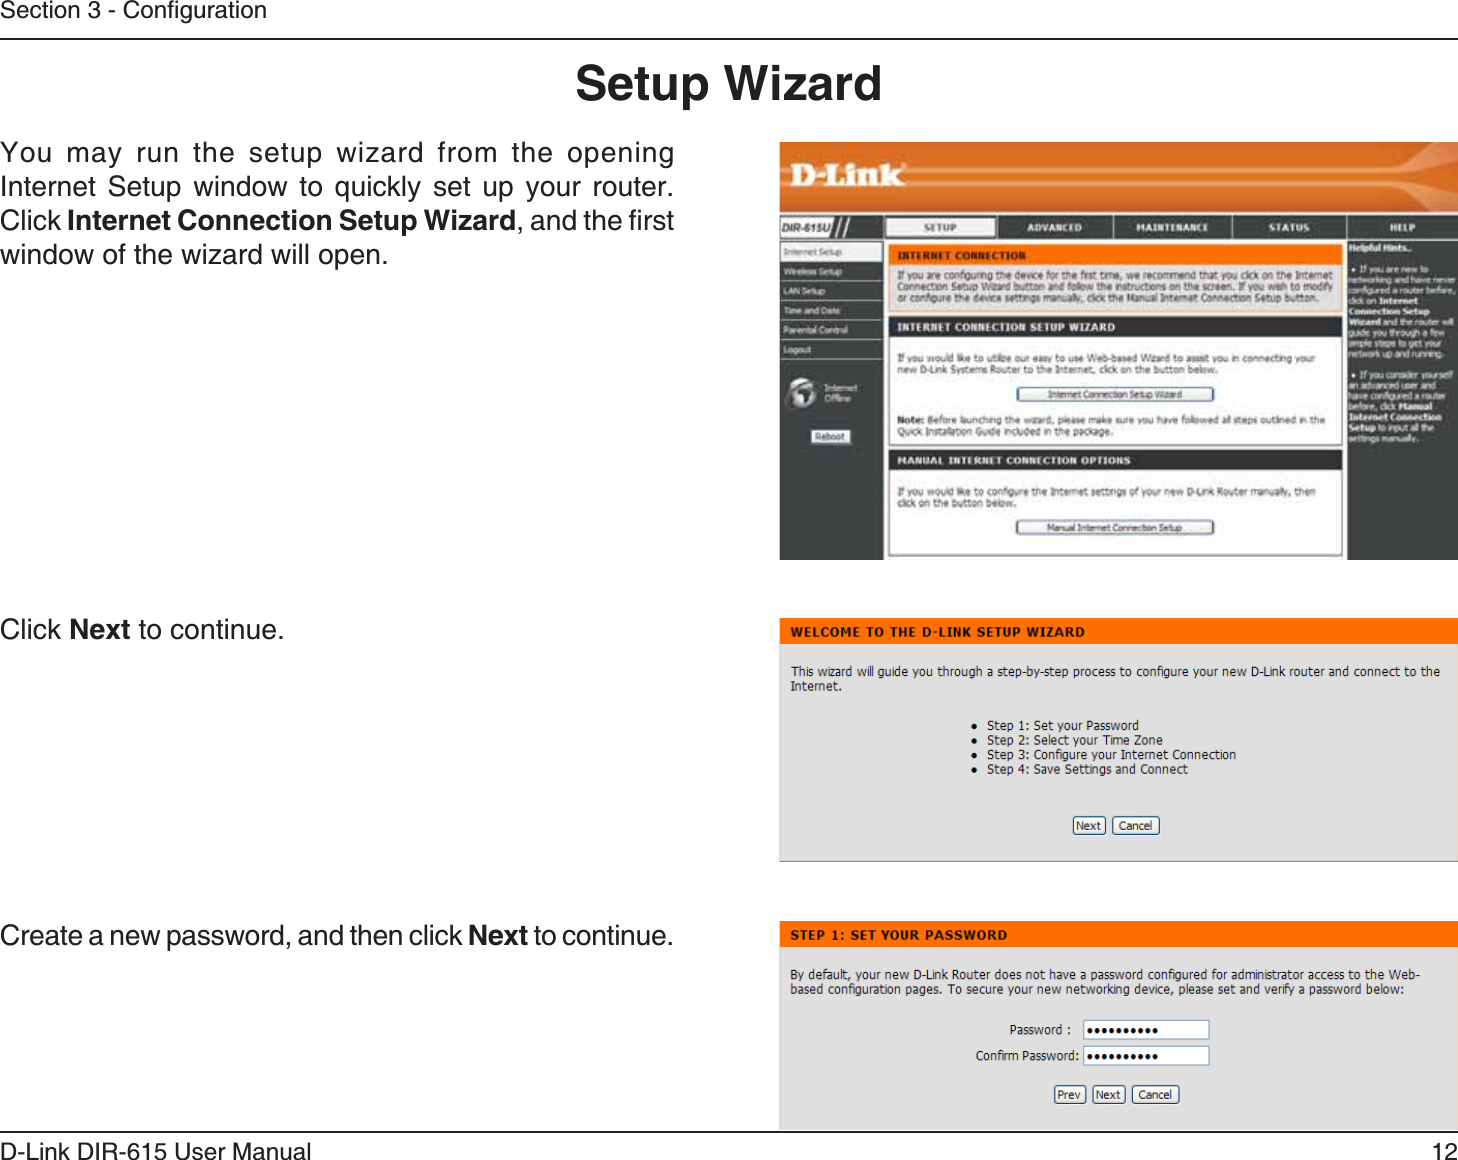 12D-Link DIR-615 User Manual5GEVKQP%QPſIWTCVKQP5GVWR9K\CTFYou may run the setup wizard from the opening Internet Setup window to quickly set up your router. Click +PVGTPGV%QPPGEVKQP 5GVWR9K\CTFCPFVJGſTUVwindow of the wizard will open.Click 0GZV to continue.%TGCVGCPGYRCUUYQTFCPFVJGPENKEM0GZV to continue.